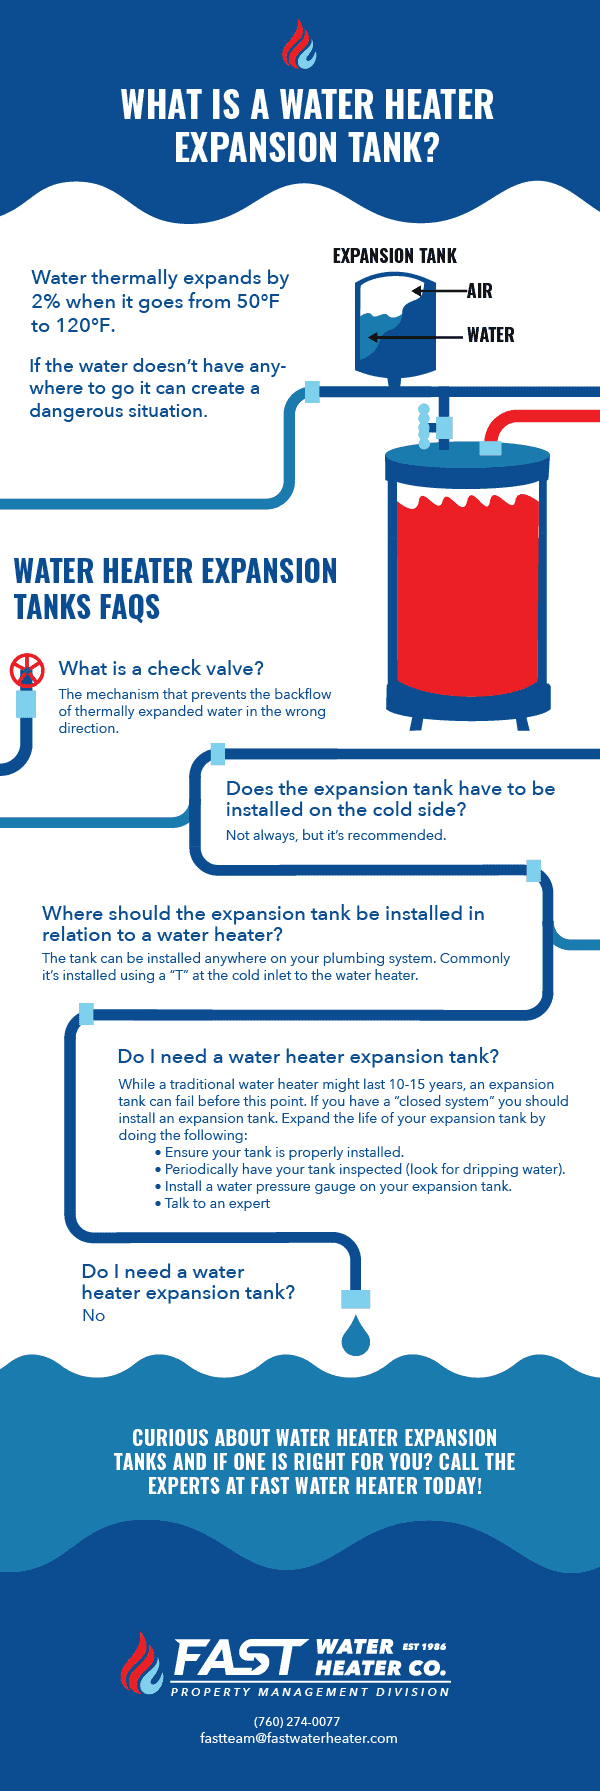 What is a water heater expansion tank